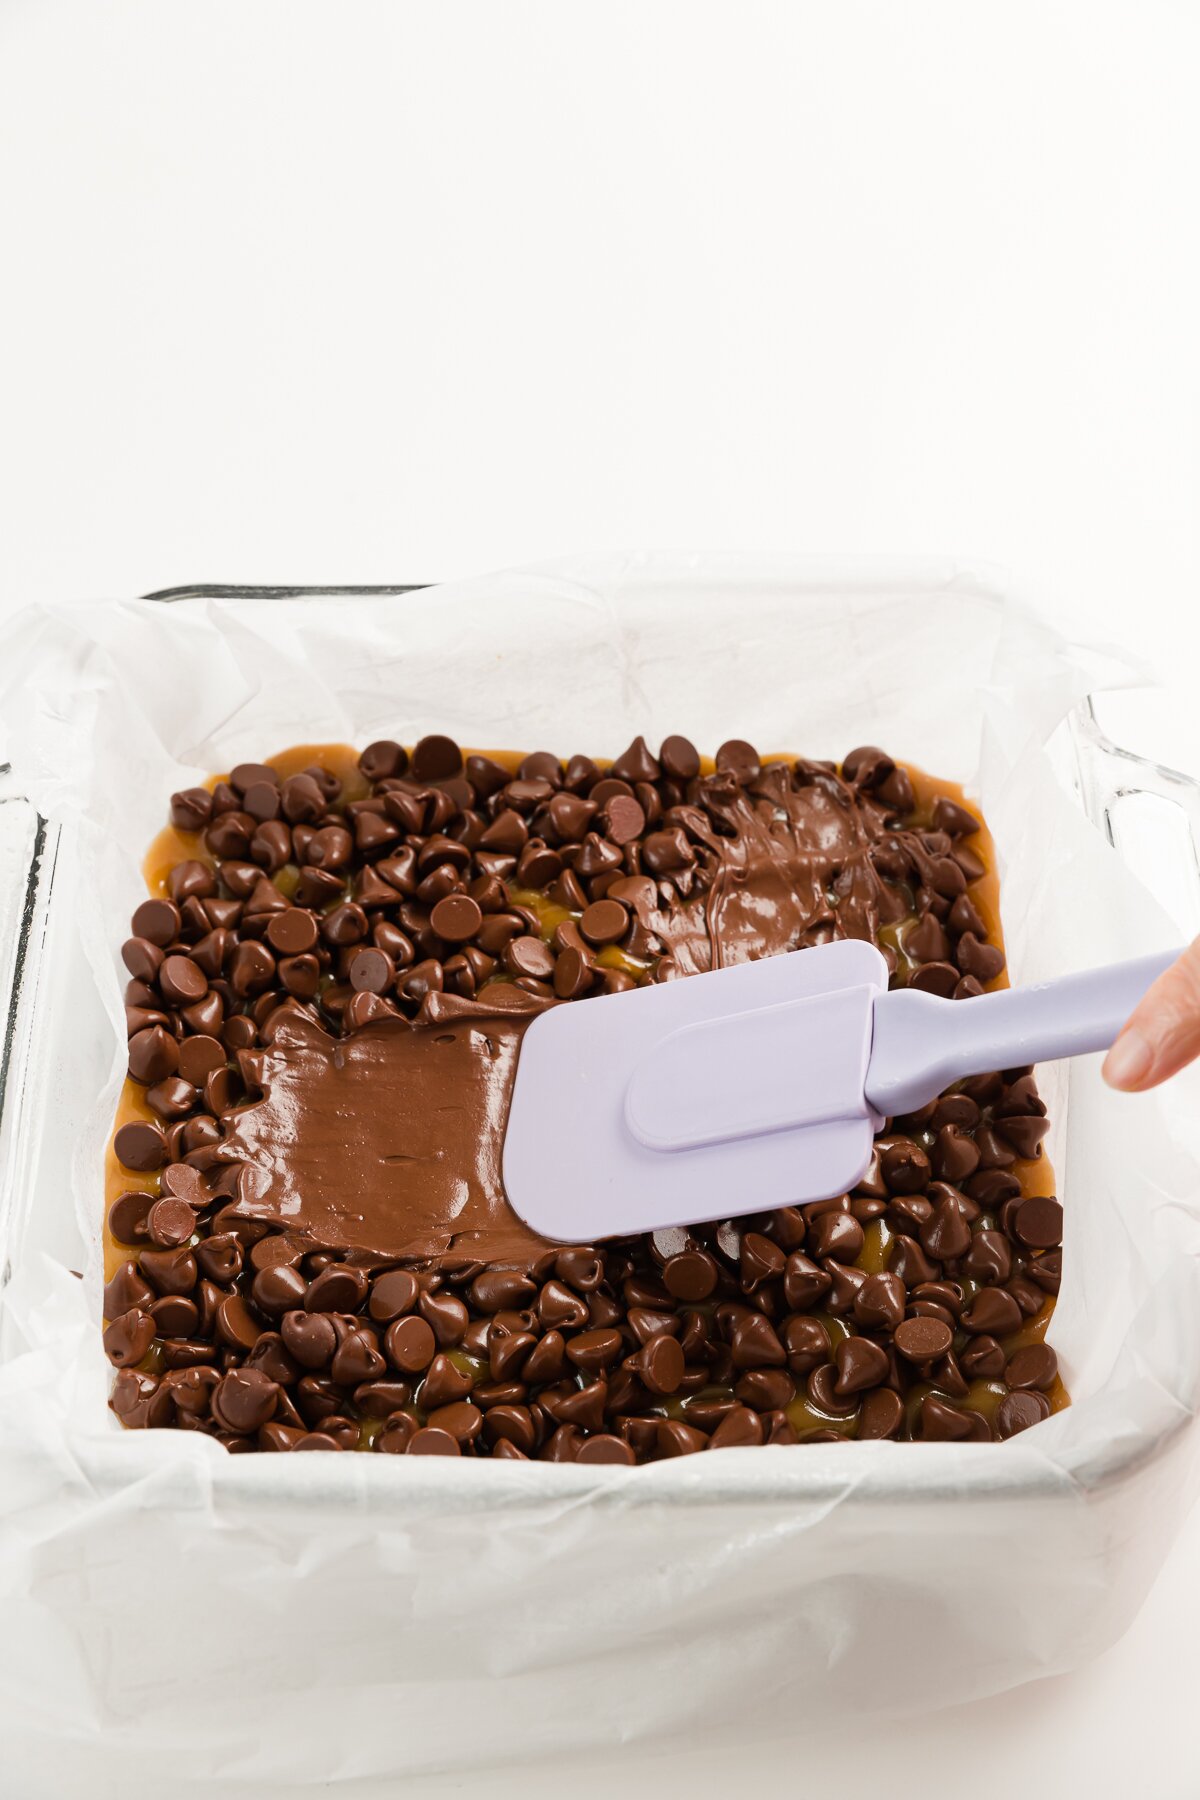 Spreading melted chocolate chips with a purple spatula